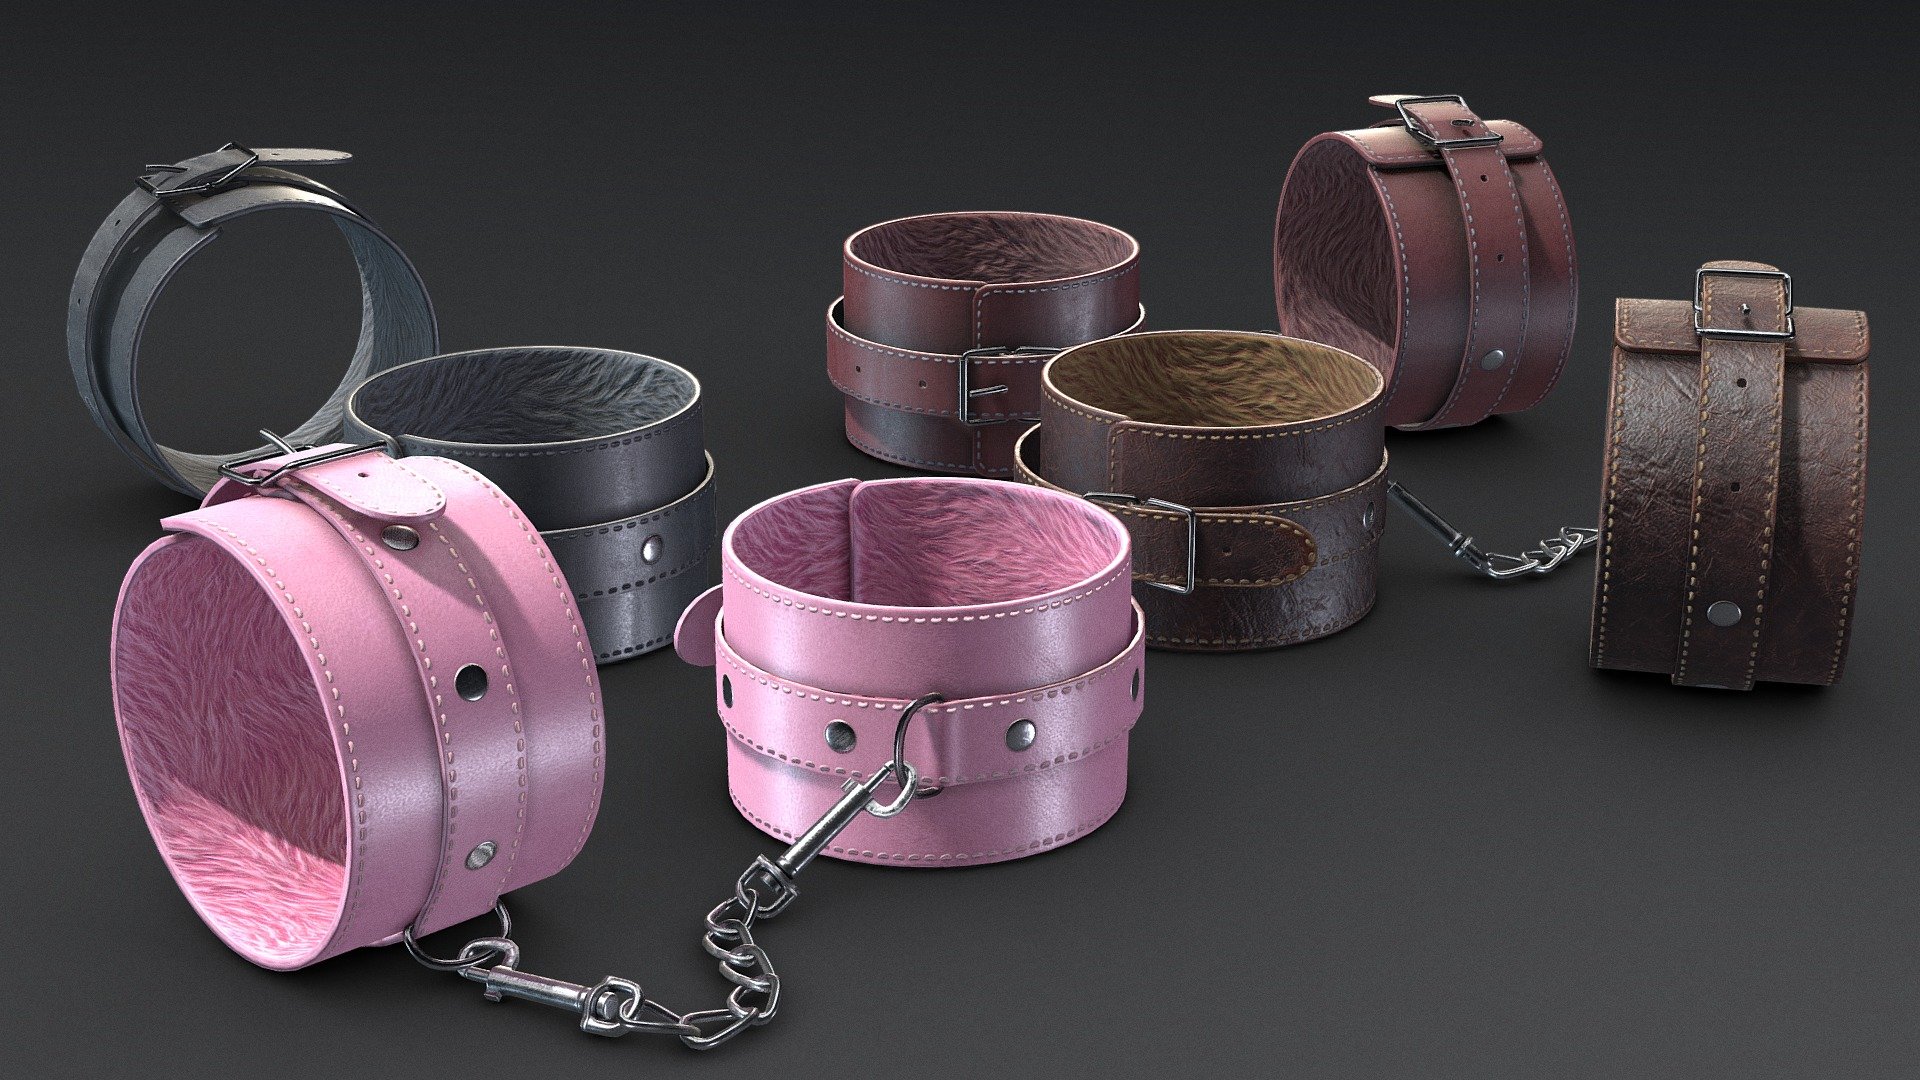 Furry leather hand cuffs
What do you get?

Models:




Hand cuff (.fbx, .obj)

Hand cuffs with chain (.fbx, .obj)

Chain (.fbx, .obj)

Chain loop (.fbx, .obj)

Chain hook (.fbx, .obj)

High poly models:




Hand cuff (.fbx, .obj)

Chain loop (.fbx, .obj)

Chain hook (.fbx, .obj)

Files are separated and put into folder structure

Unity Standard Shader textures :

All versions included!




Albedo 2048x2048

Normal 2048x2048

Specular 2048x2048

Ambient Oclussion 2048x2048

UE4 textures :

All versions included!




Albedo 2048x2048

Normal 2048x2048

RMA (Rougness, Metalness, Ambient Oclussion - channel packed texture) 2048x2048



Feel free to contact me via PM. Happy shopping, .MG


VR / AR / Low-poly / Game ready / hand cuffs / furry / bdsm / xxx 3D model - Furry leather hand cuffs - PBR VR Game Ready - Buy Royalty Free 3D model by miloszgierczak 3d model